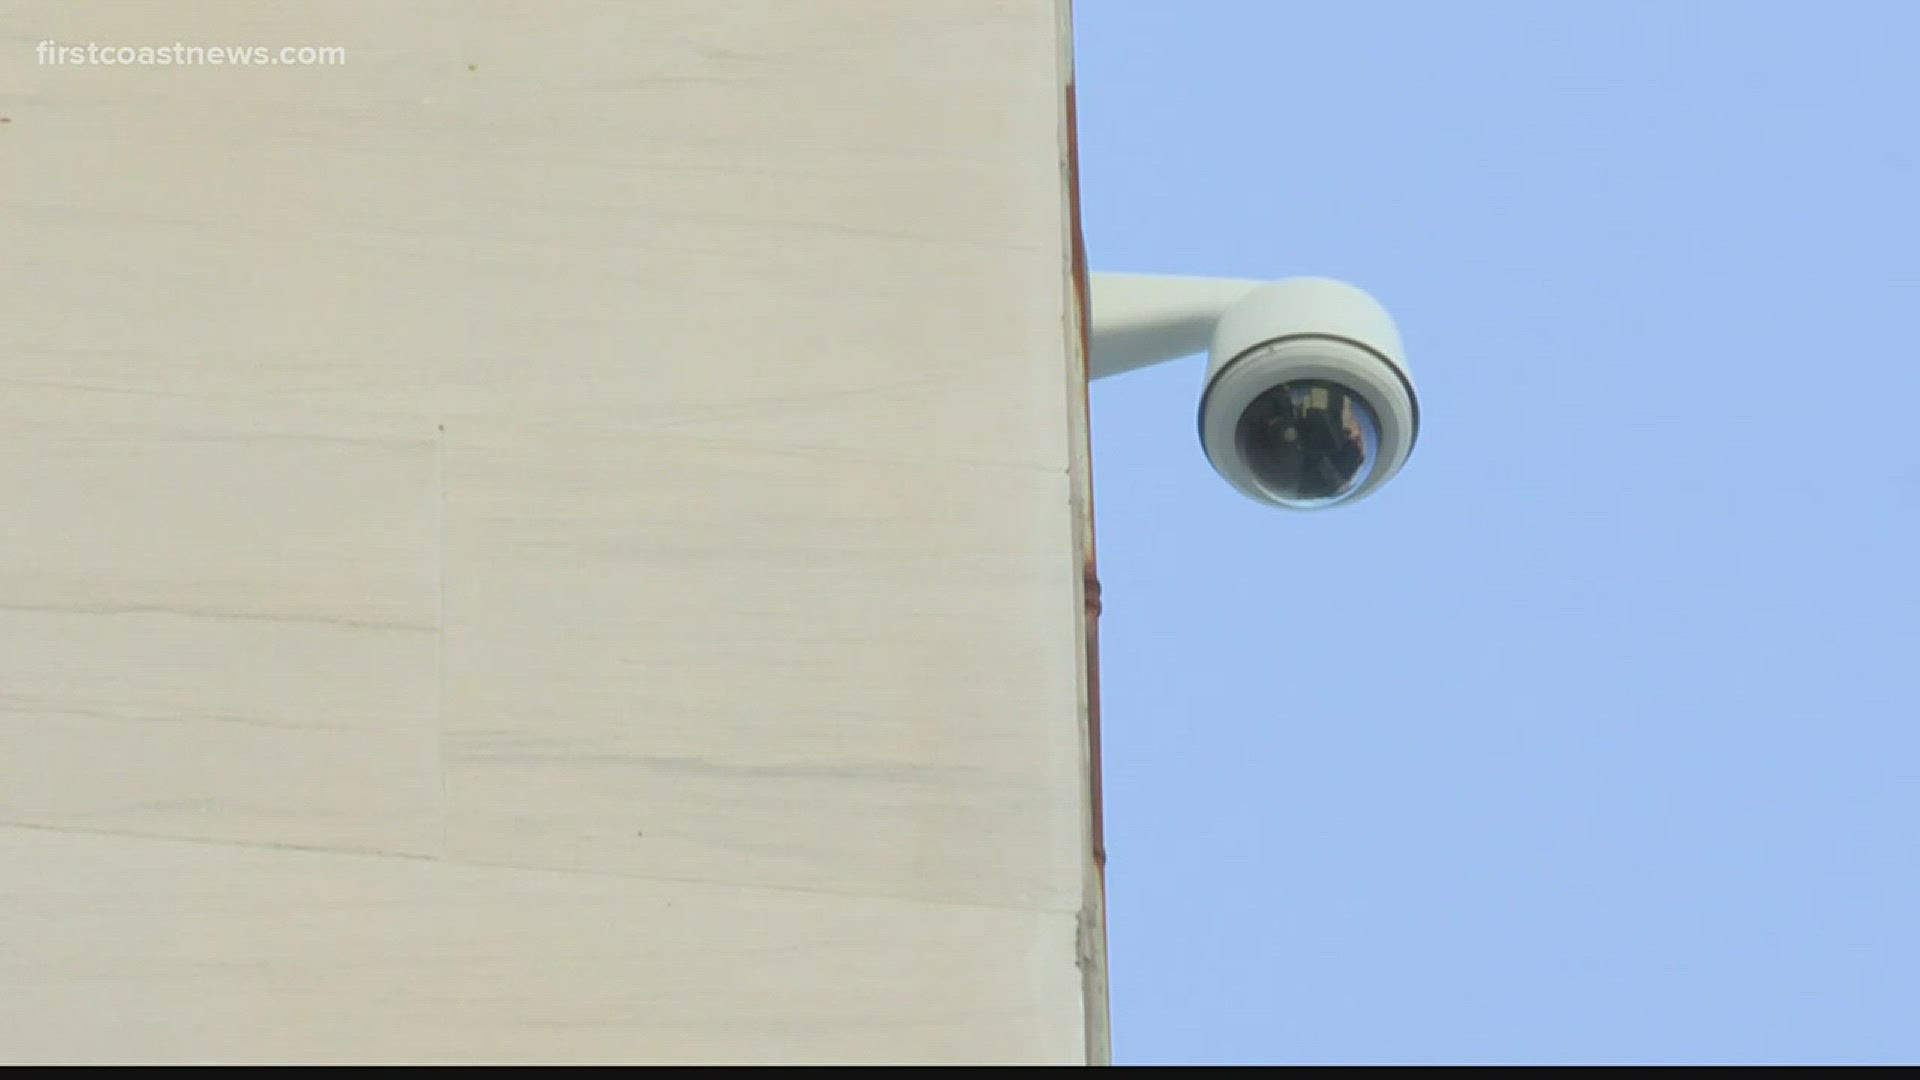 . City Council members will decide whether they want to spend roughly $3.5 million to update or install security cameras across the city.